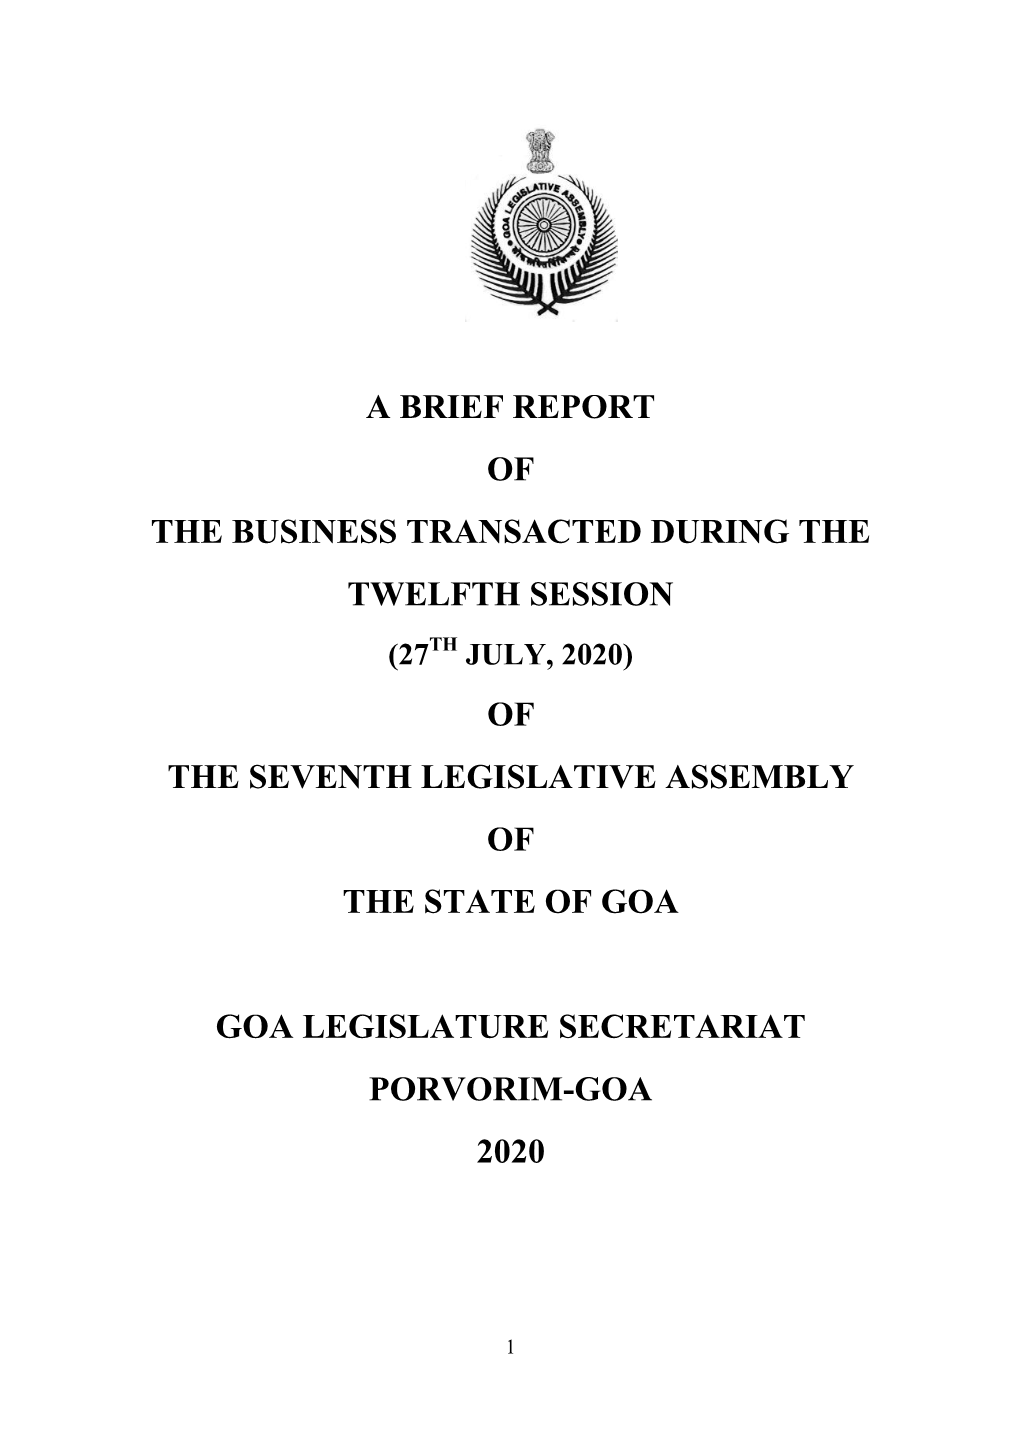 A Brief Report of the Business Transacted During the Twelfth Session (27Th July, 2020) of the Seventh Legislative Assembly of the State of Goa